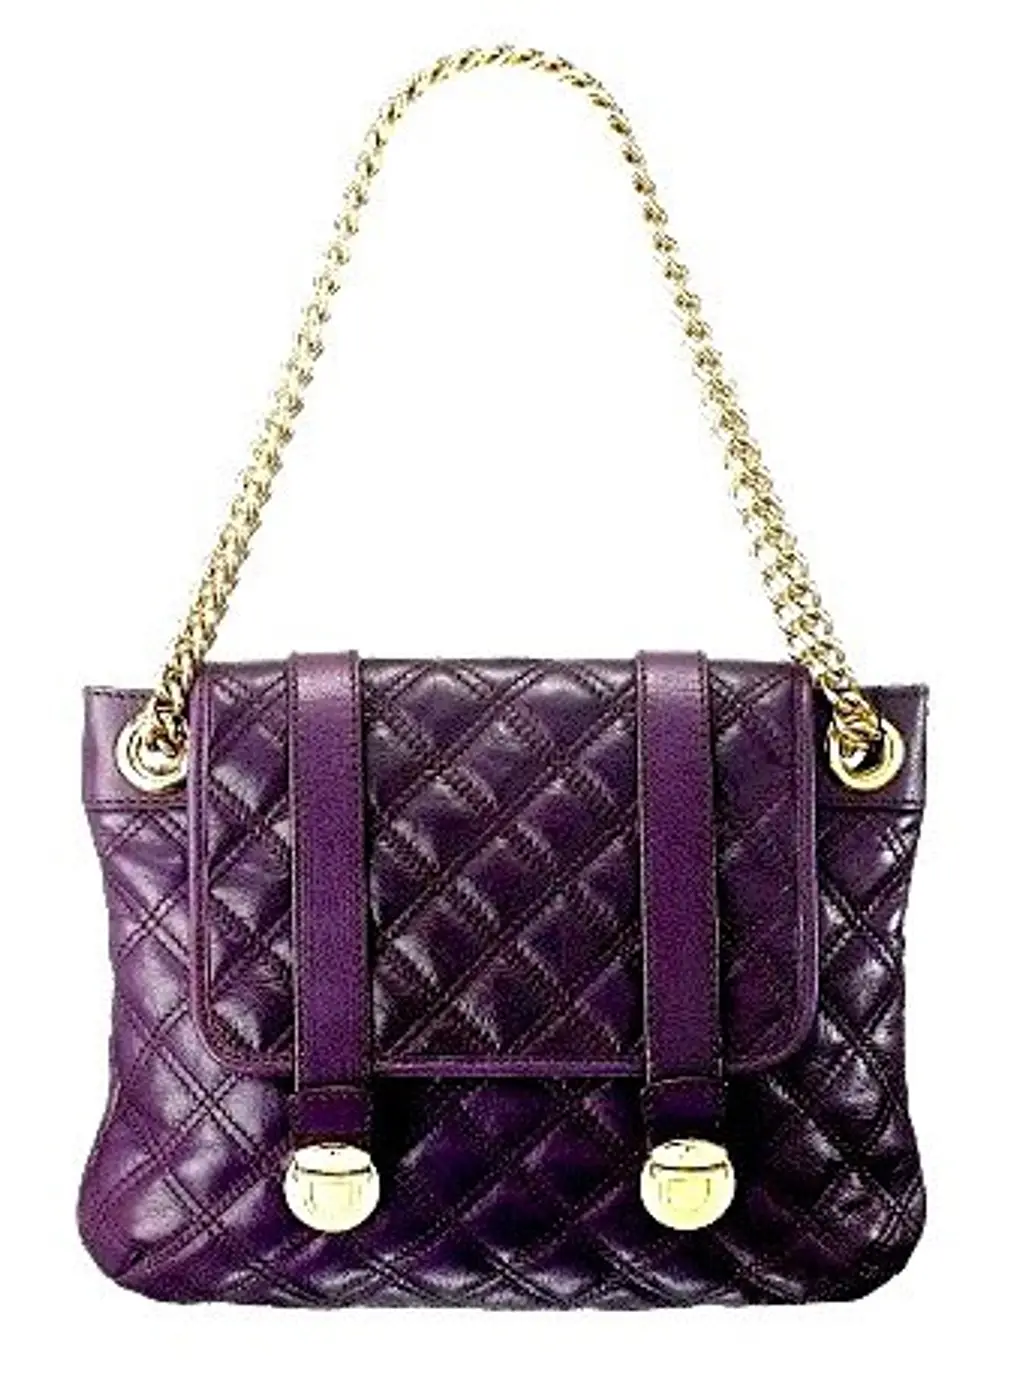 Marc Jacobs Purple Bag with Golden Chain